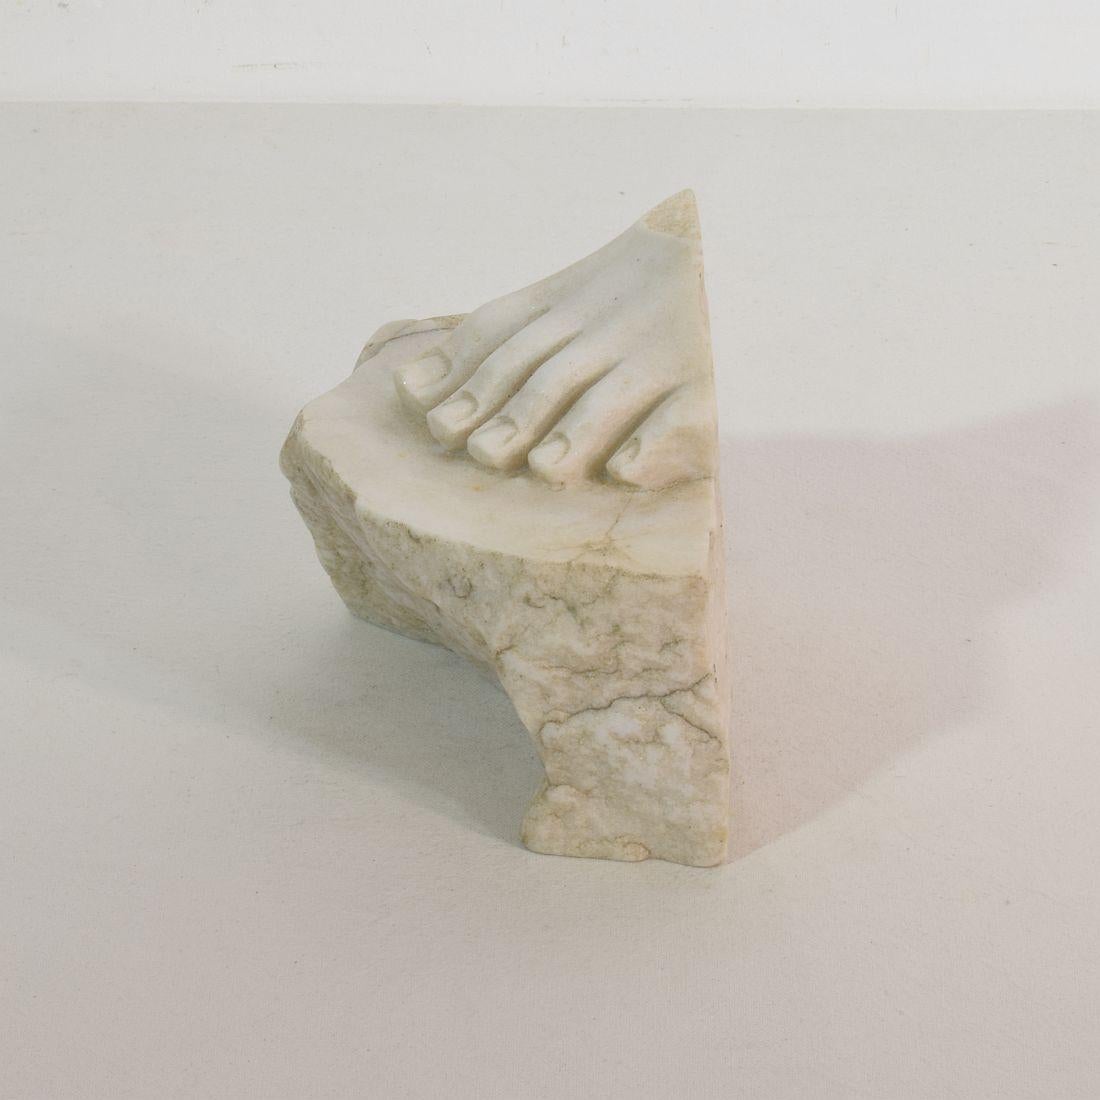 18th-19th Century Italian Marble Fragment of a Foot 5